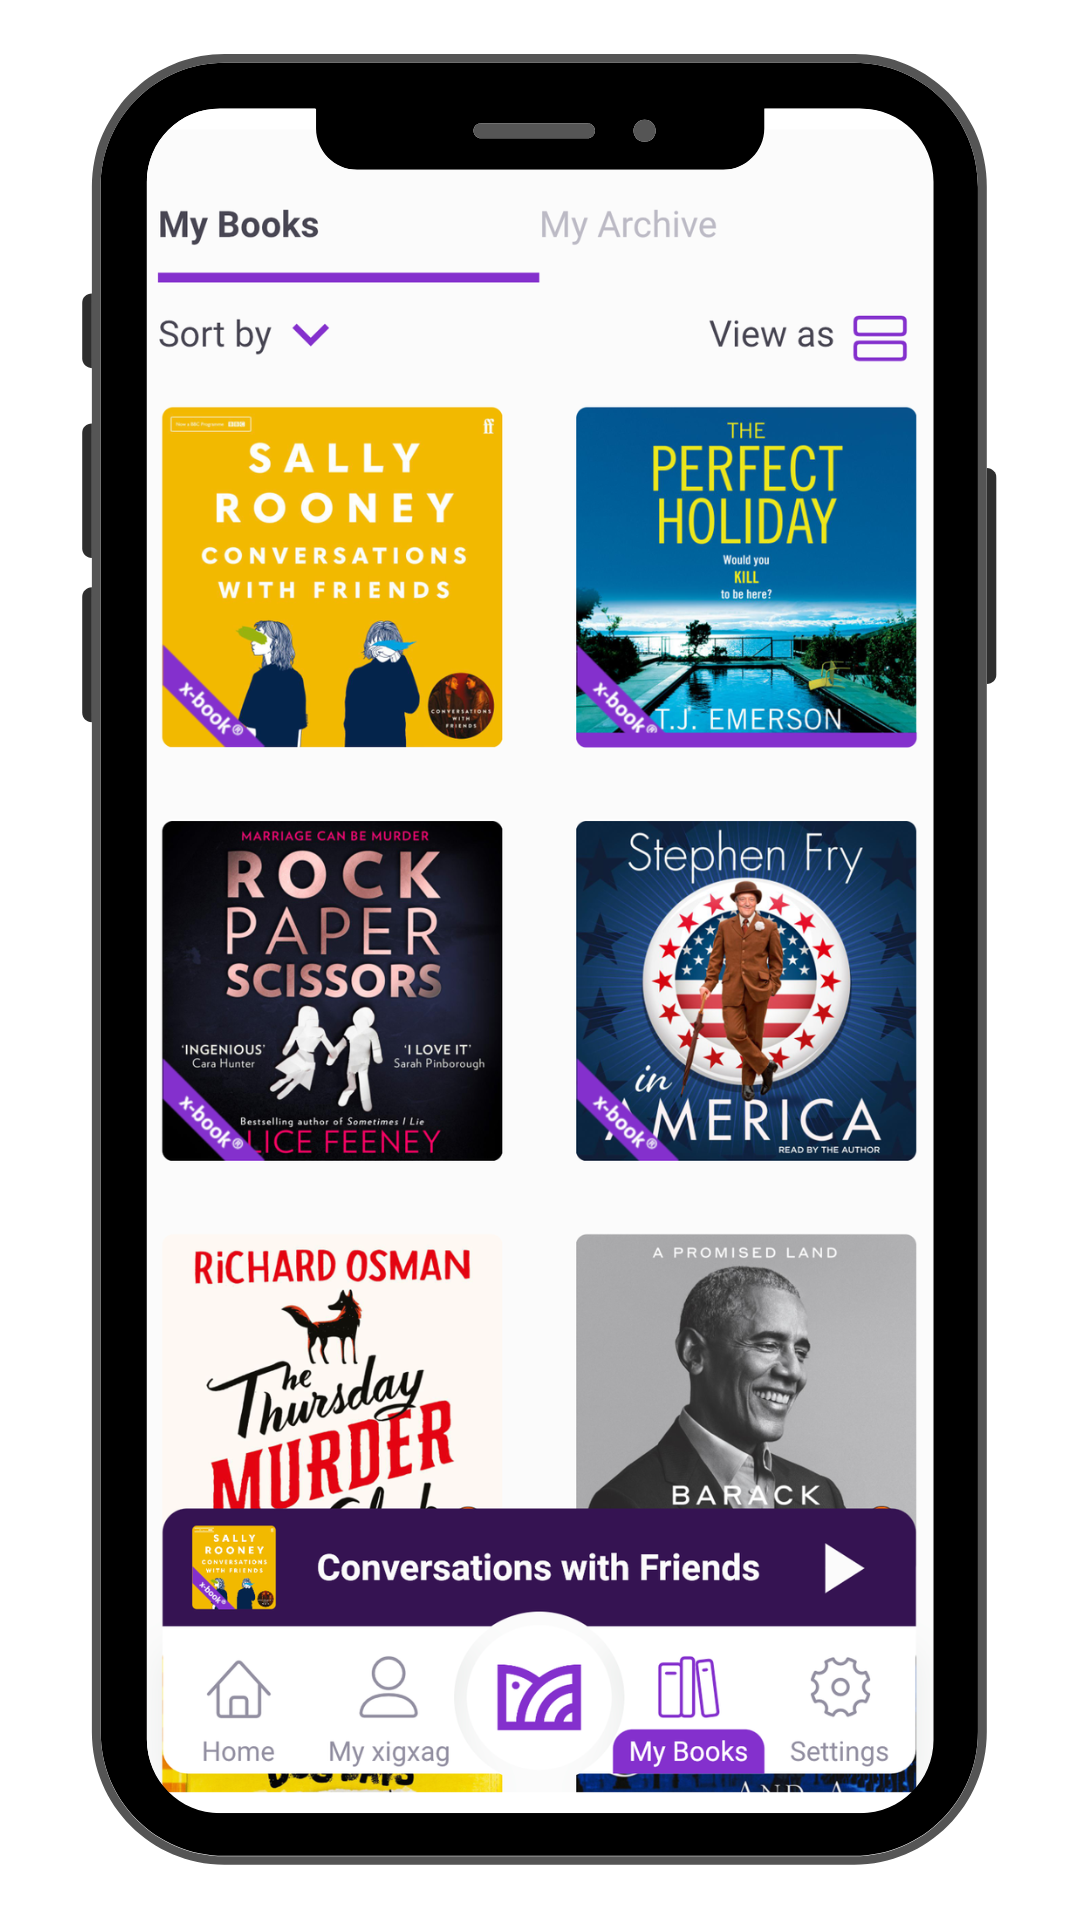 My books section of the xigxag app with brilliant titles from Sally Rooney and Stephen Fry